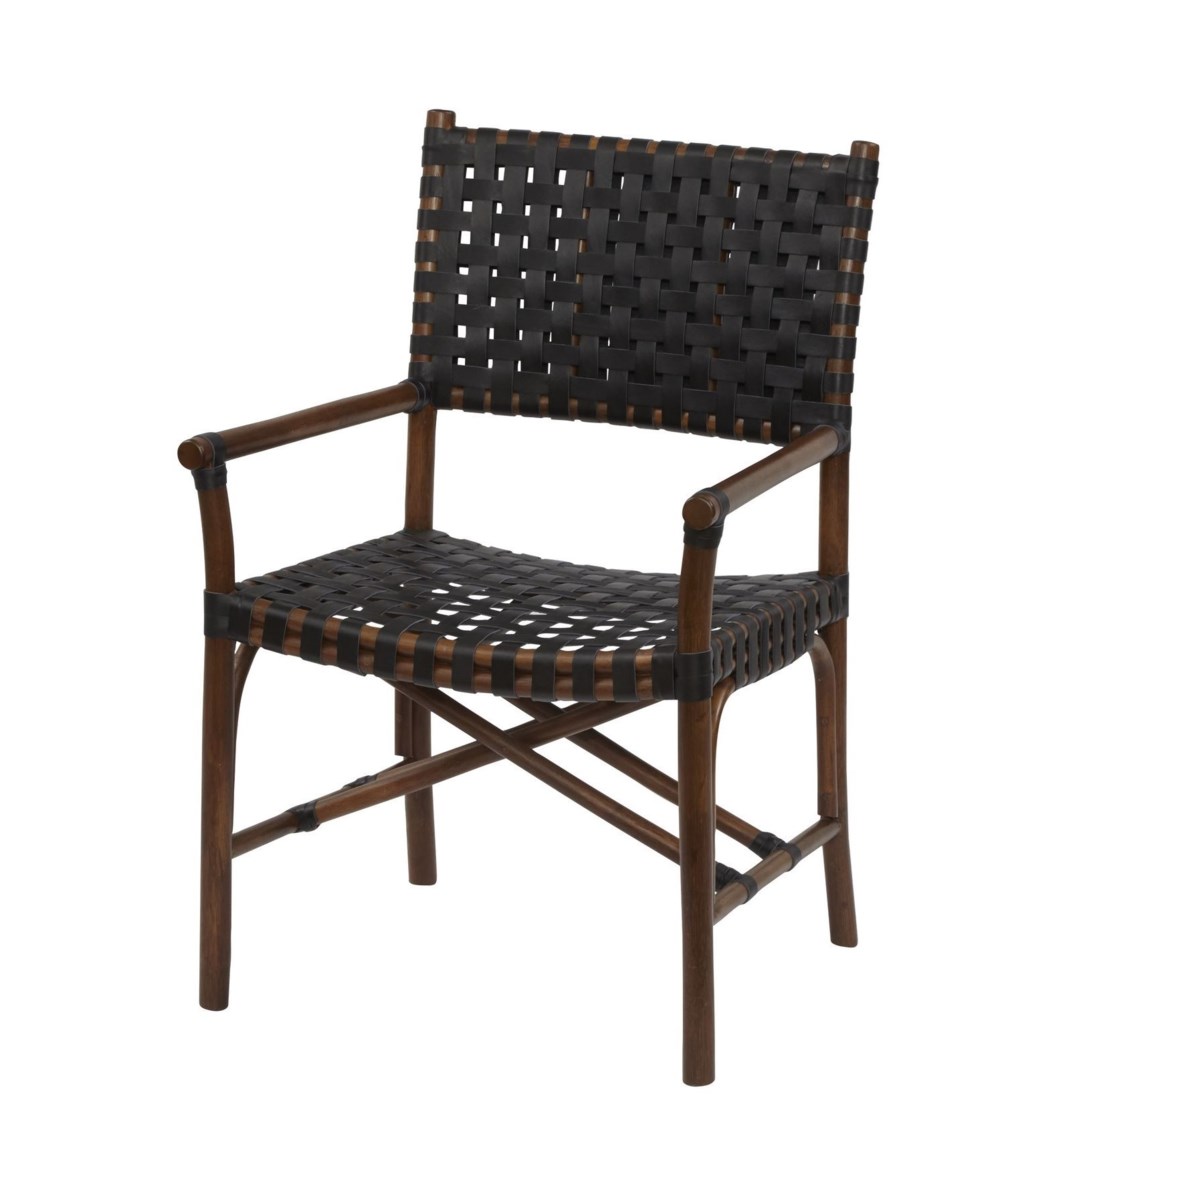 Malibu Arm Chair Frame Color - Cocoa Leather Color - Black CLOSE-OUT - 50% OFF!SOLD AS-IS  ~  A